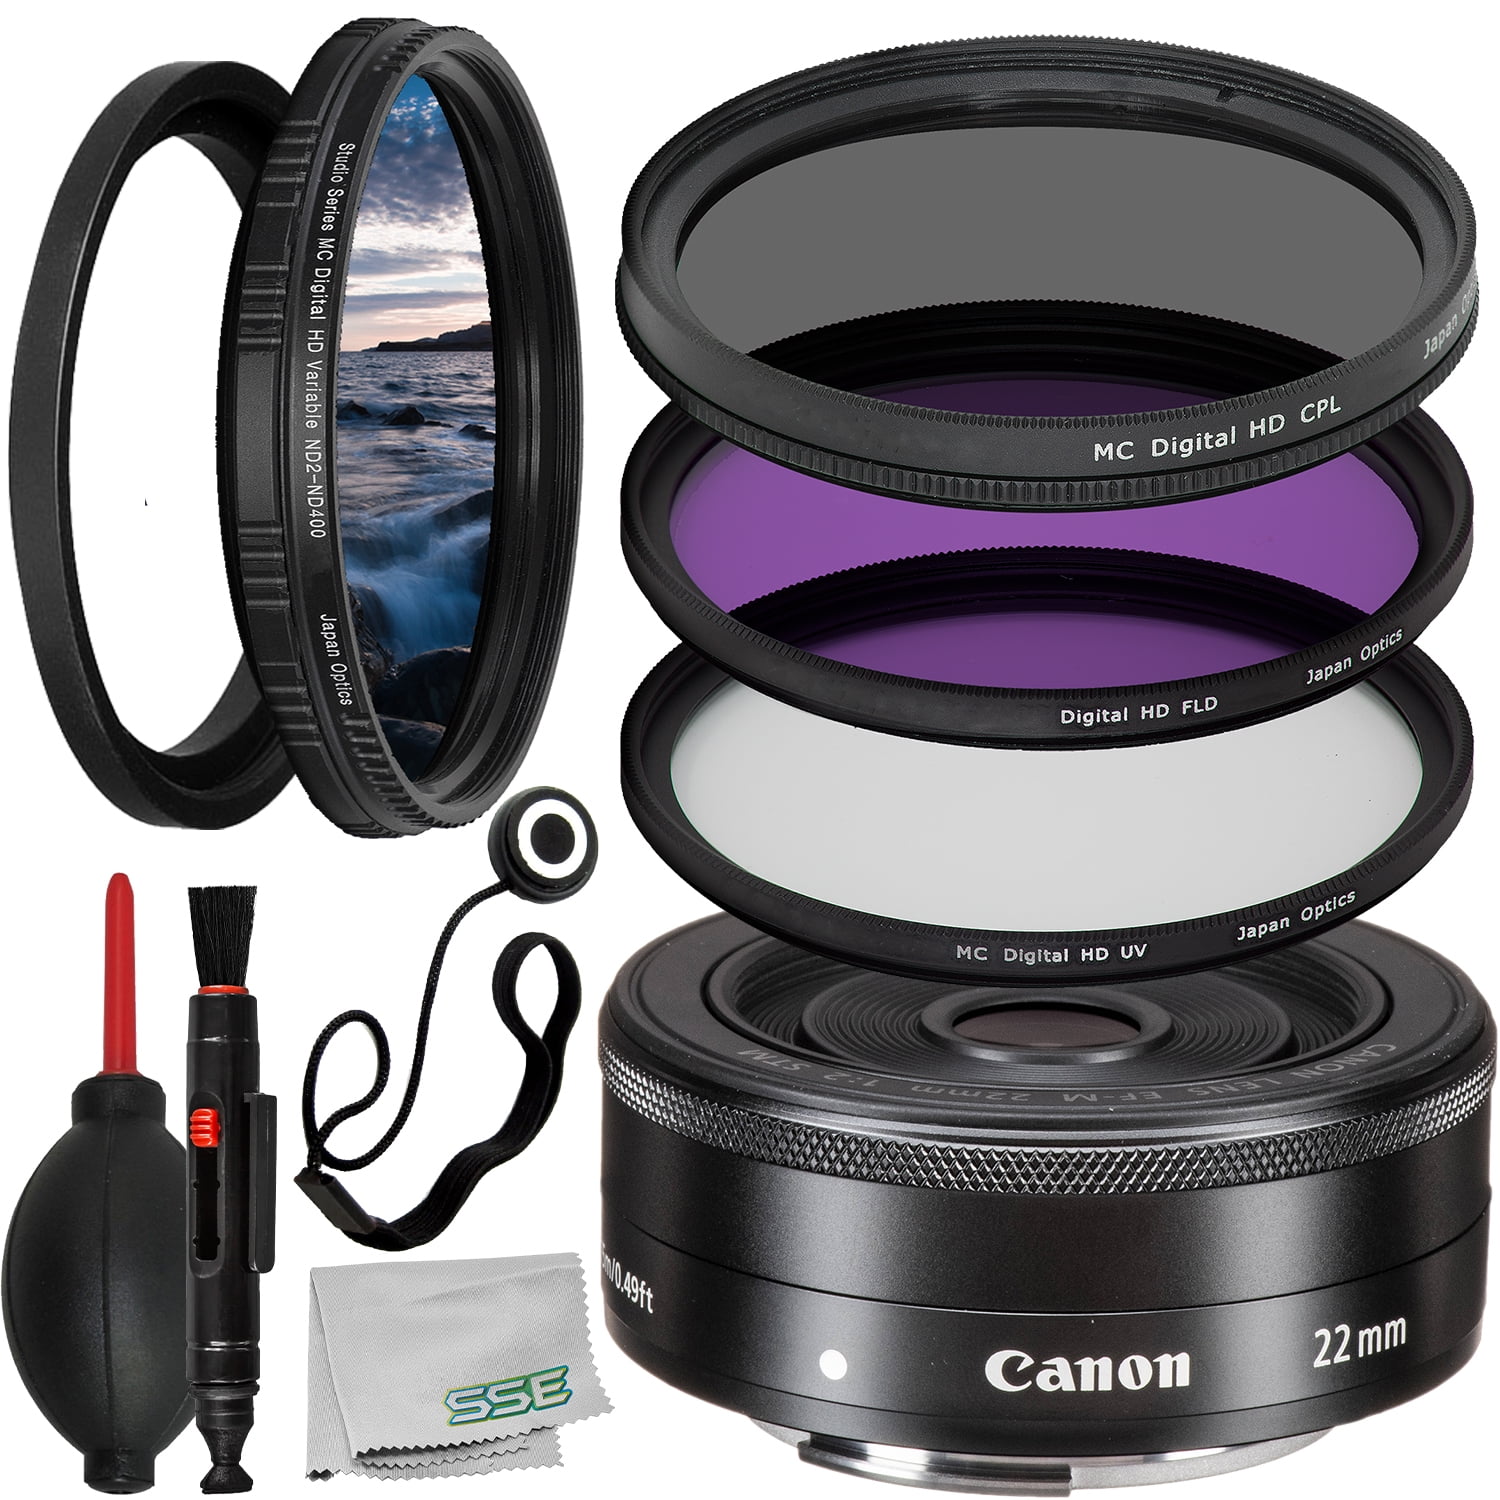 Canon EF-M 22mm f/2 STM Lens (White Box) with Basic Accessory Bundle -  Includes: 3 Piece UV Filter Kit (UV, CPL, FLD), Variable Neutral Density  Filter (ND2 – ND400), Lens Cap Keeper